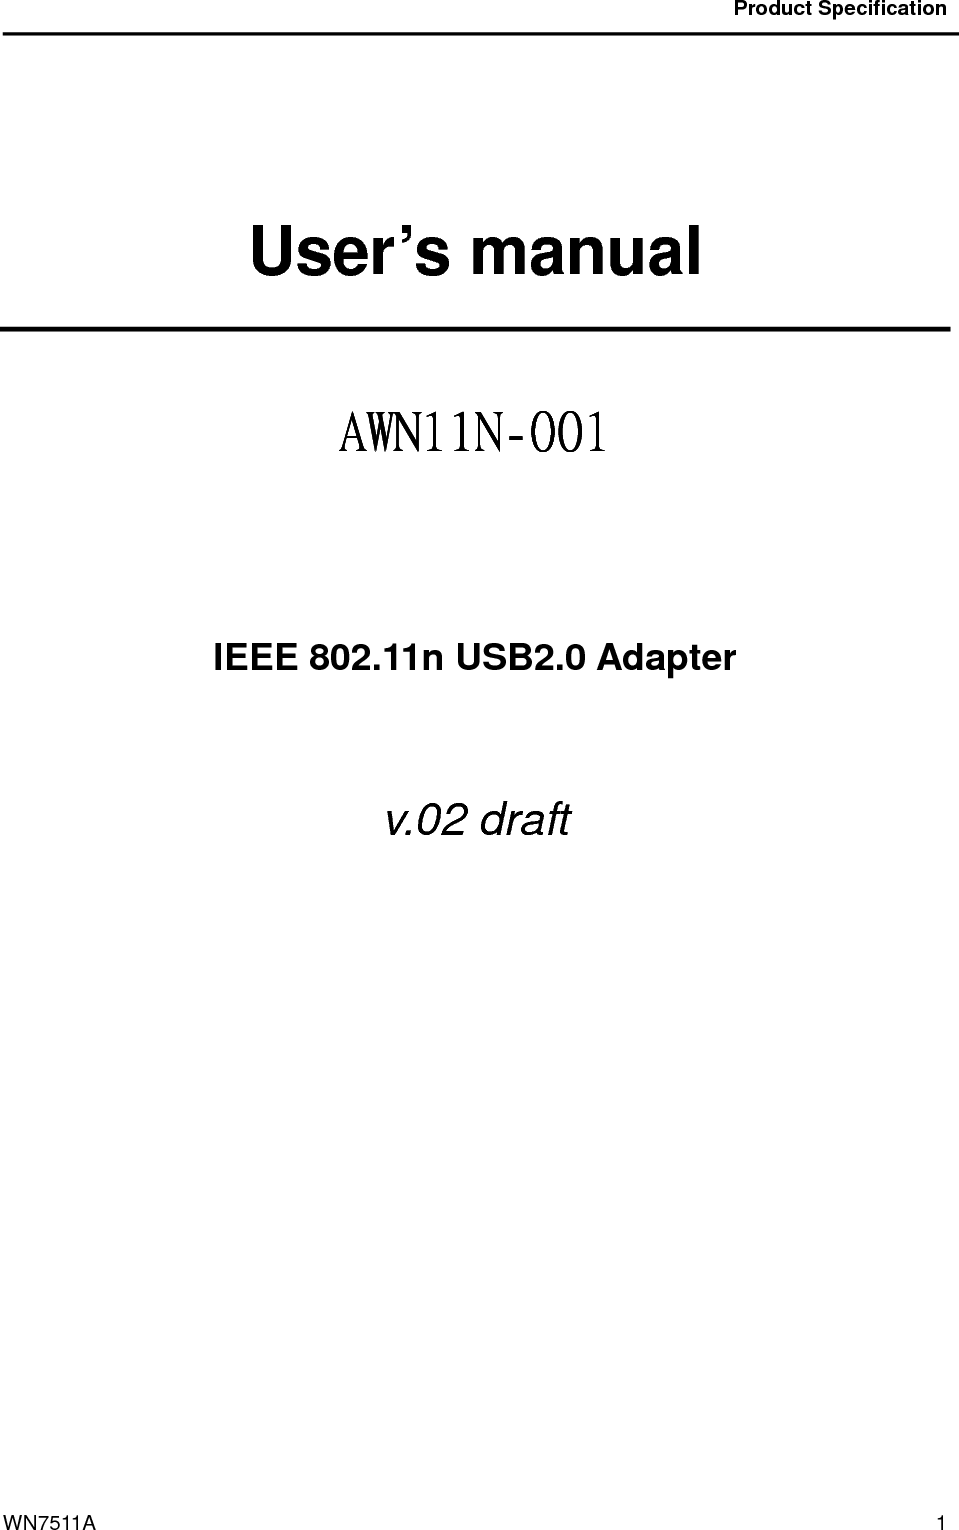                                           Product Specification                                              WN7511A  1  User’s manual  AWN11NAWN11NAWN11NAWN11N----001001001001        IEEE 802.11n USB2.0 Adapter  v.02 draft    